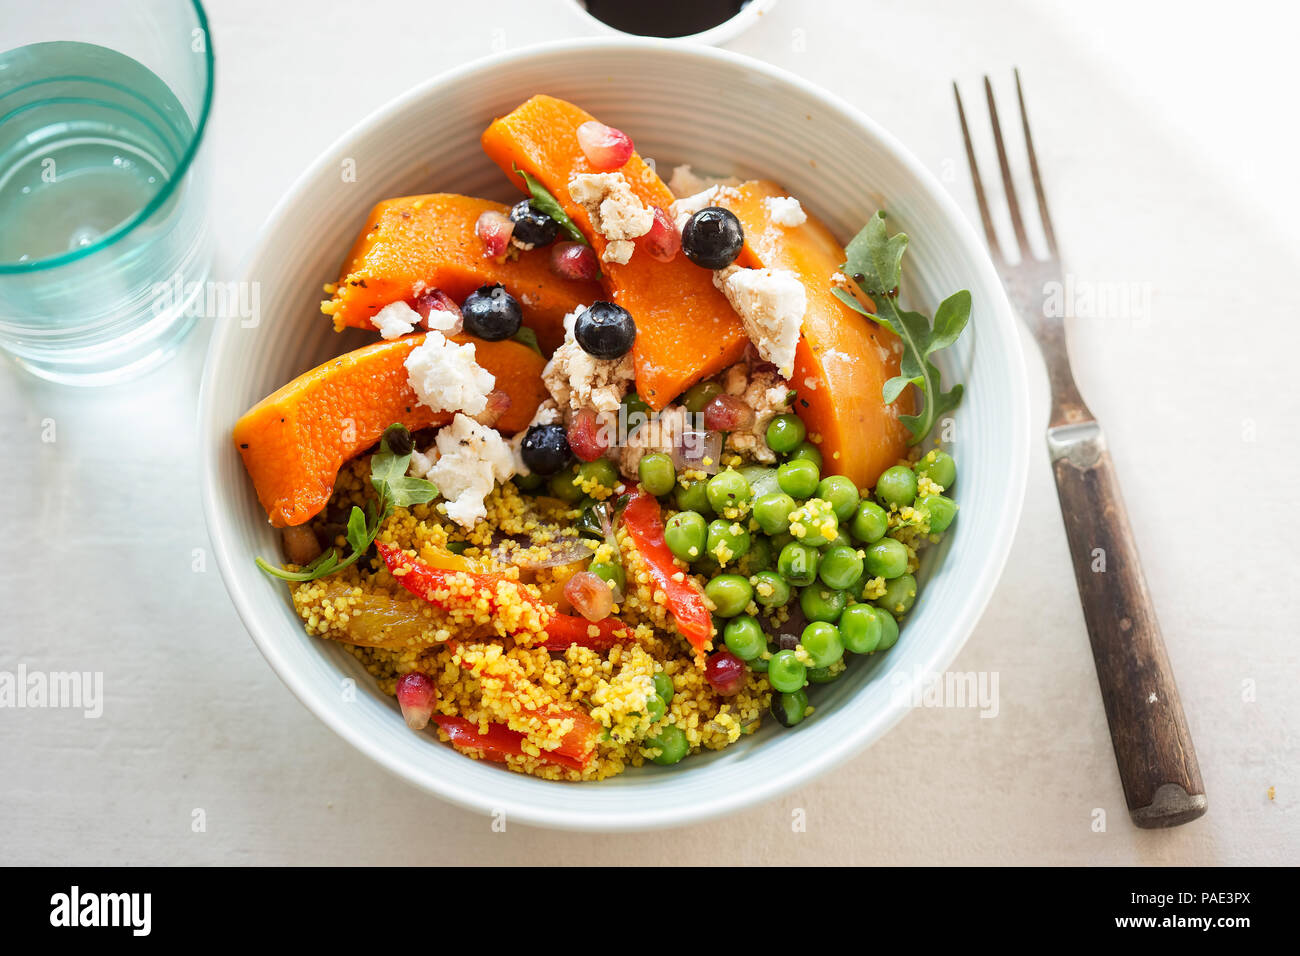 Couscous, red peppers, peas with butternut squash, blueberries and goat's cheese salad Stock Photo